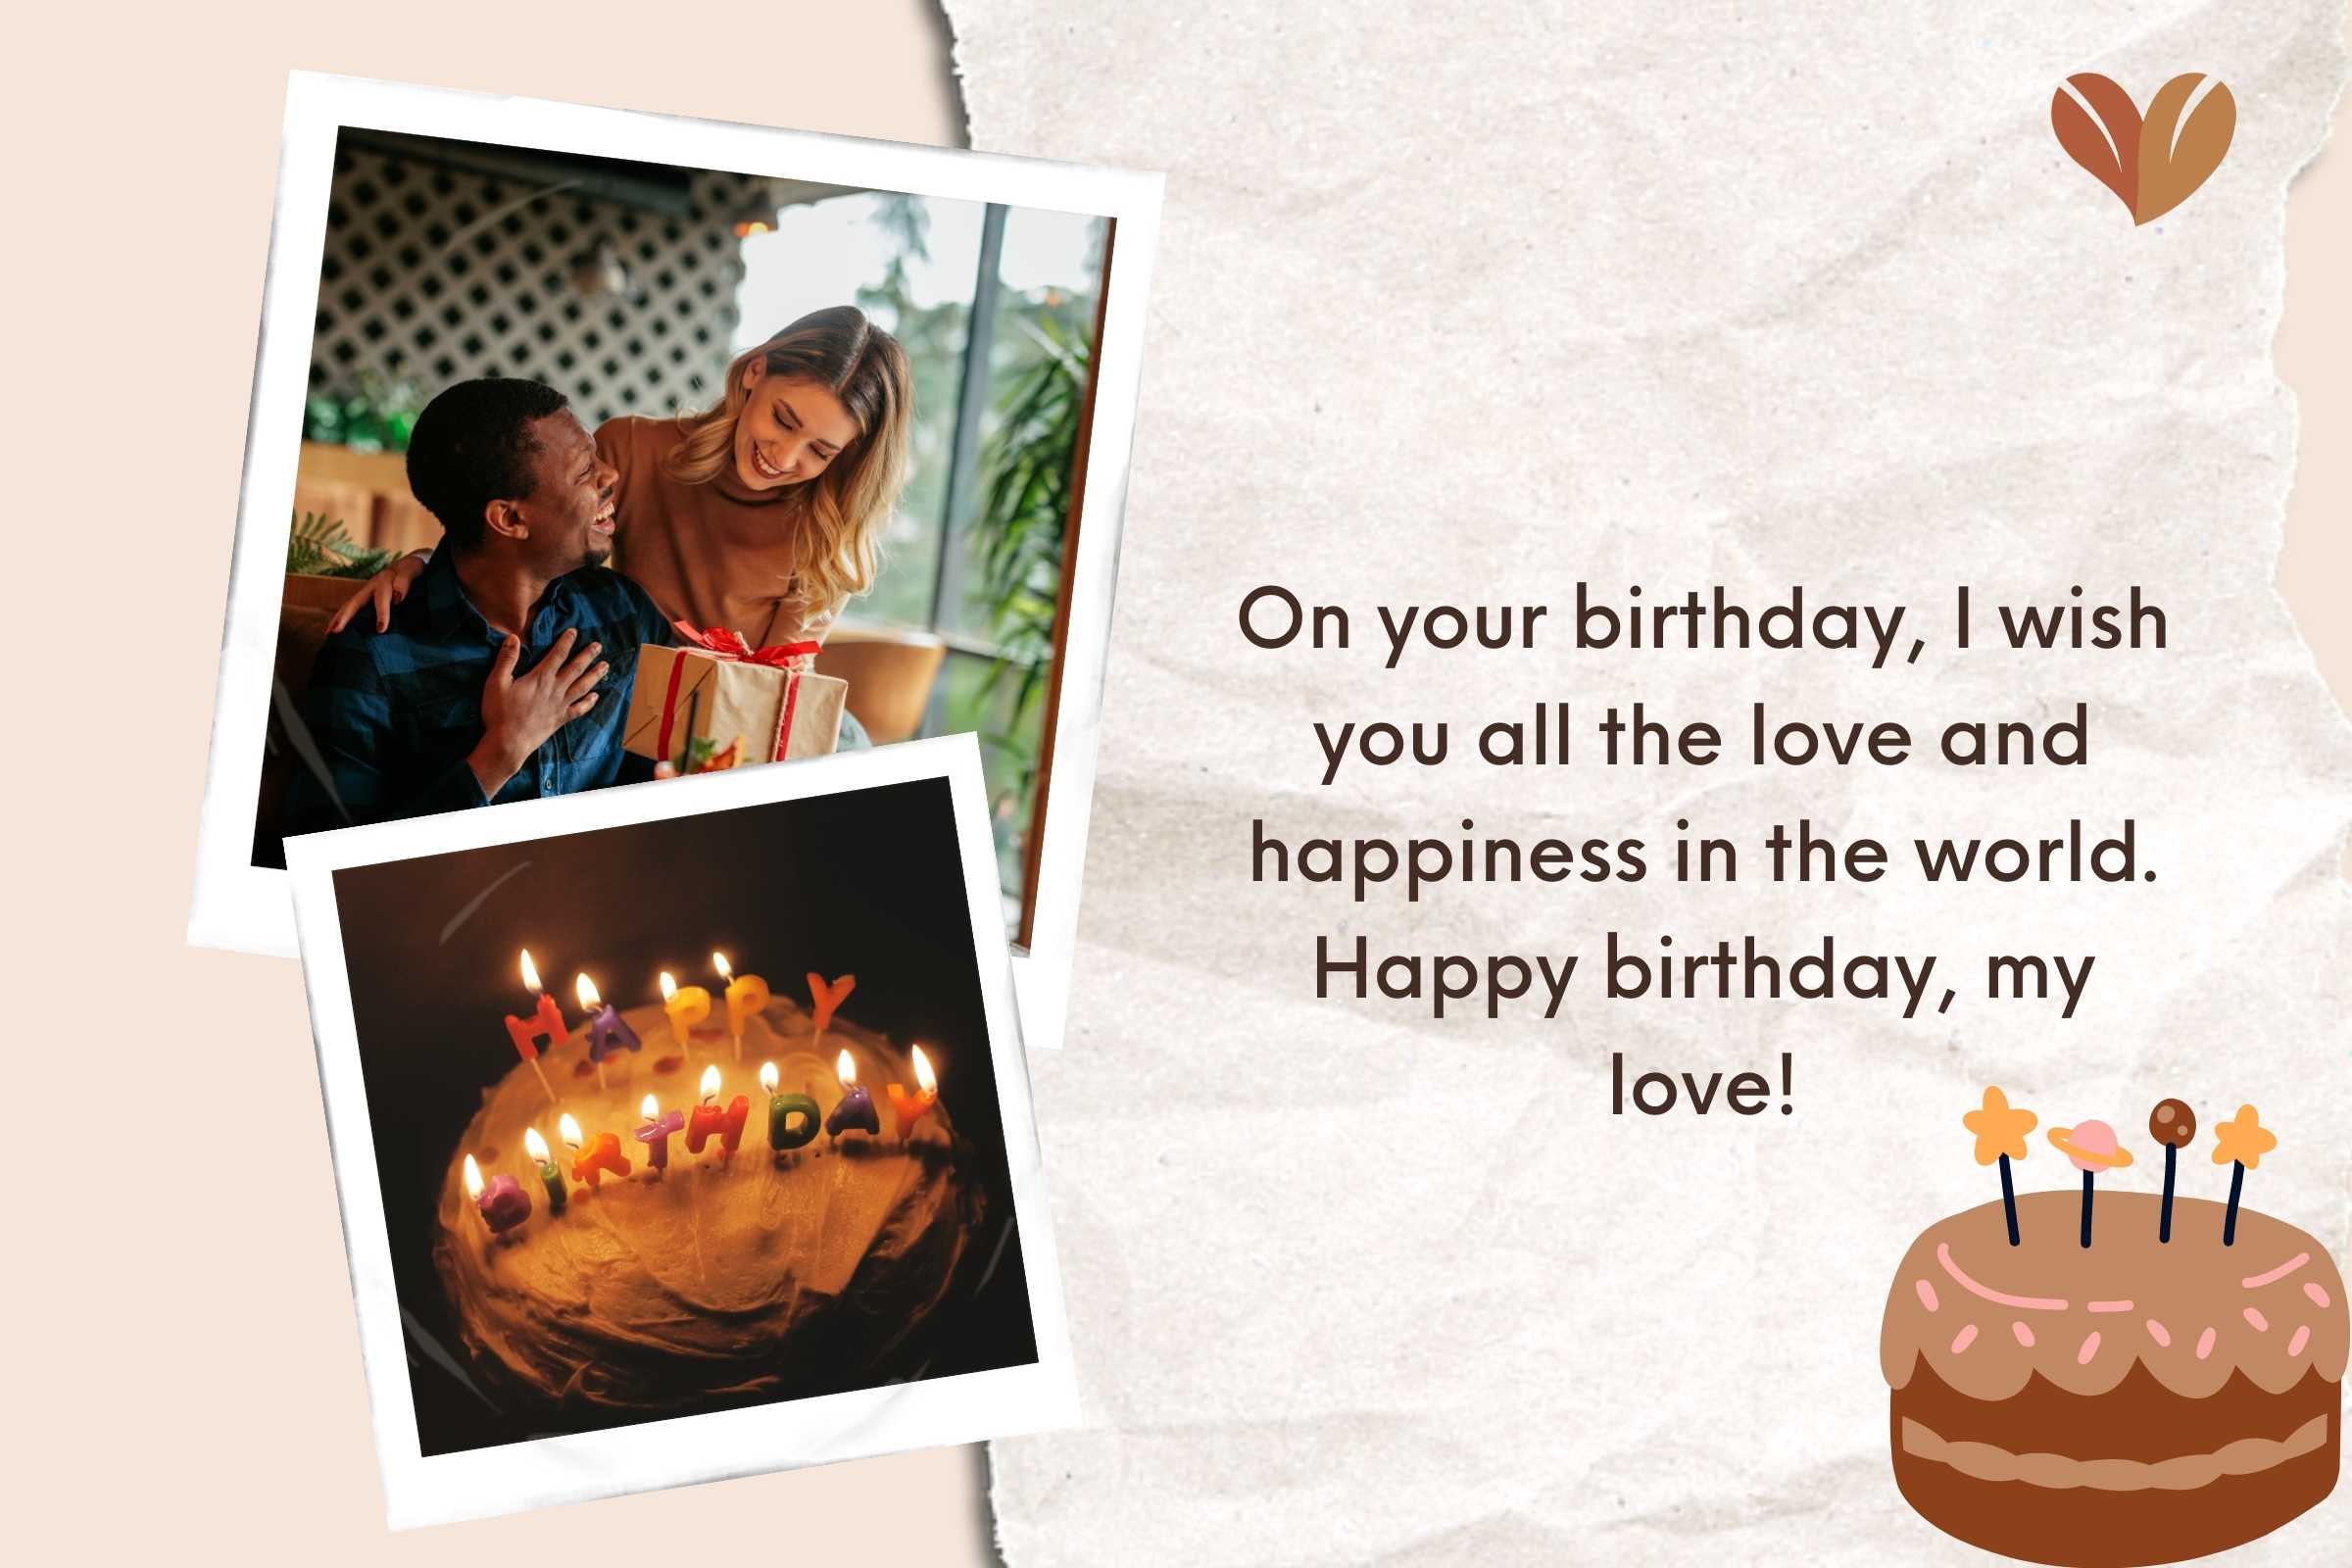 Marking a day of love and happiness with 'happy birthday my world' wishes and smiles.